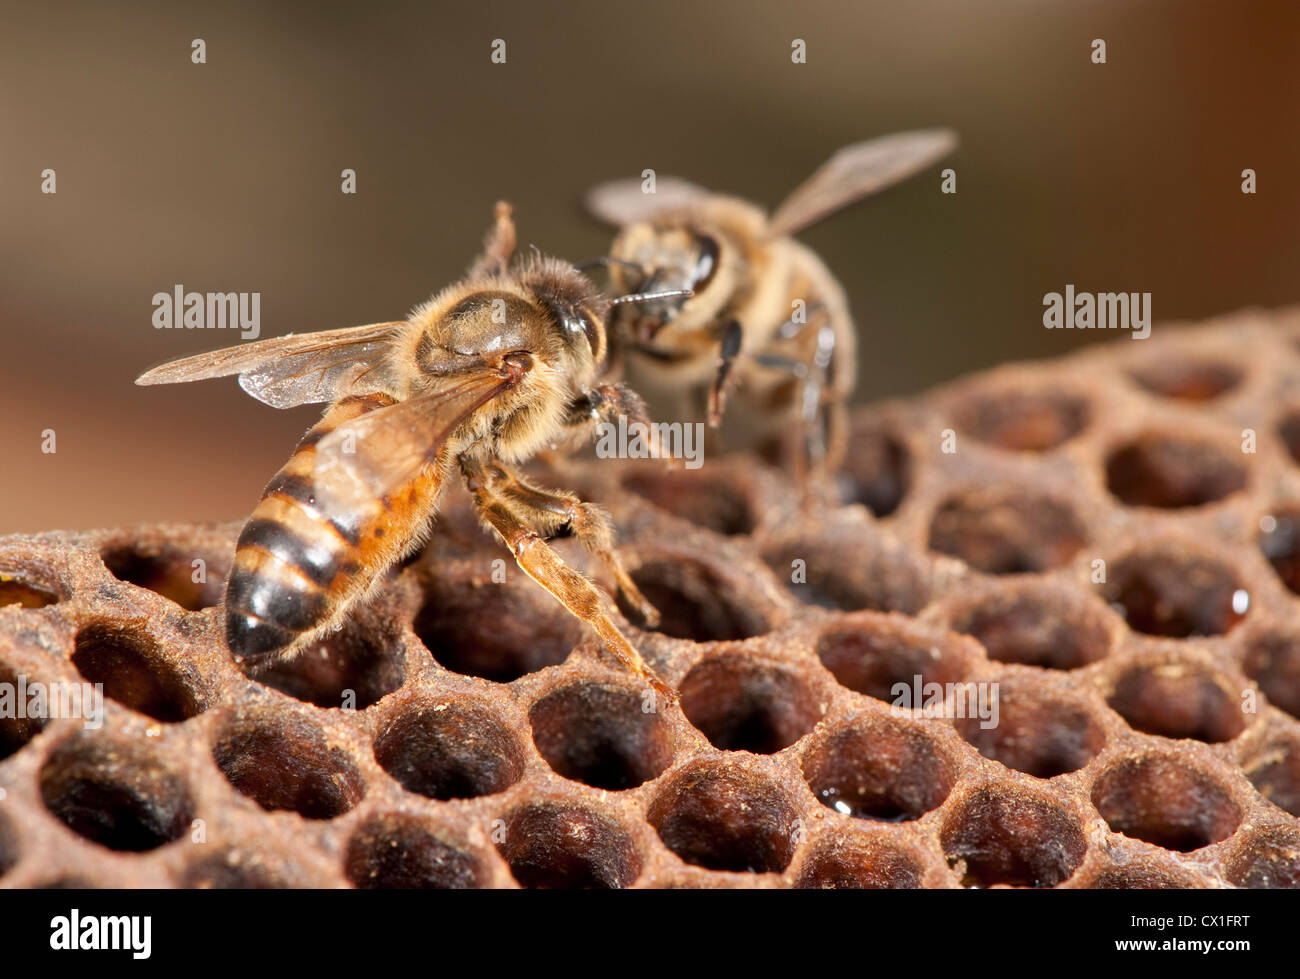 Queen being grooomed by worker Honey Bee Apis mellifera Kent UK on honeycomb cells from inside hive Stock Photo